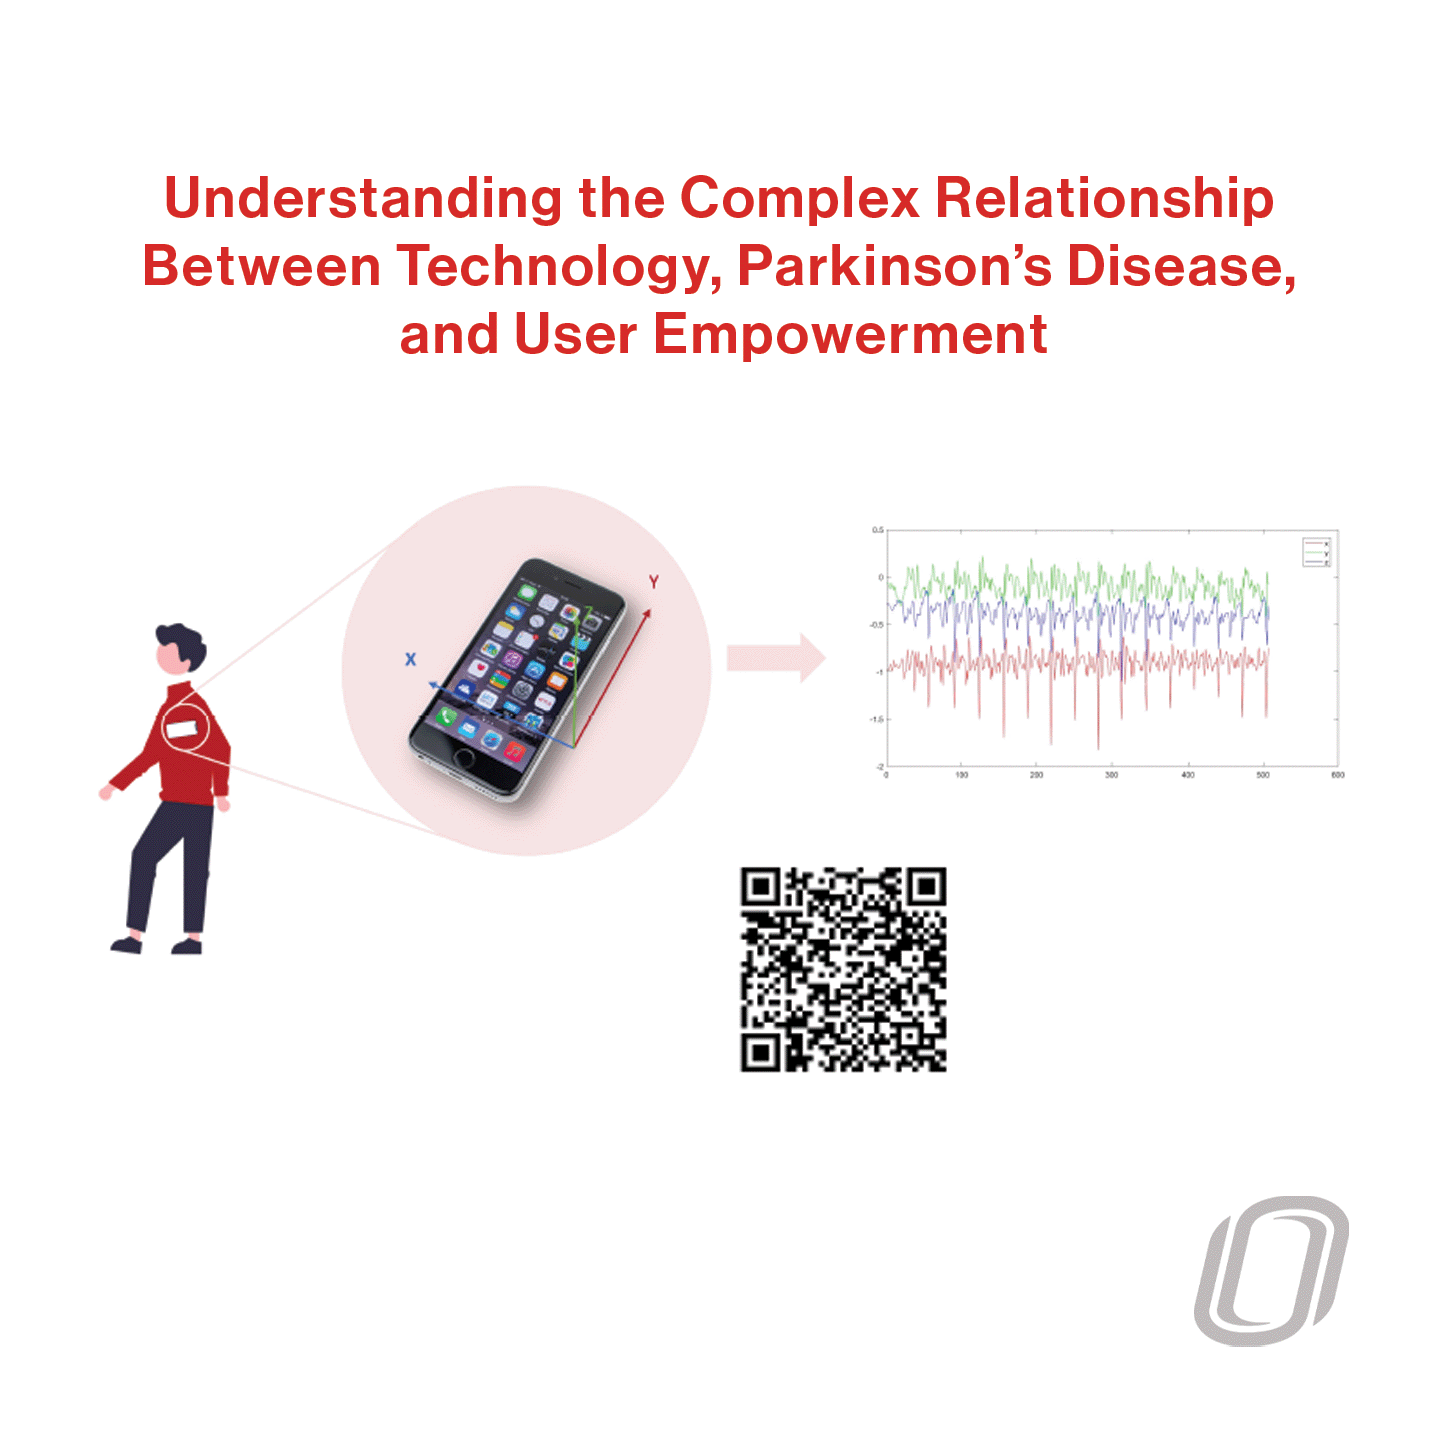 a diagram that shows the understanding of the complex relationship between technology, Parkinson's disease, and user empowerment